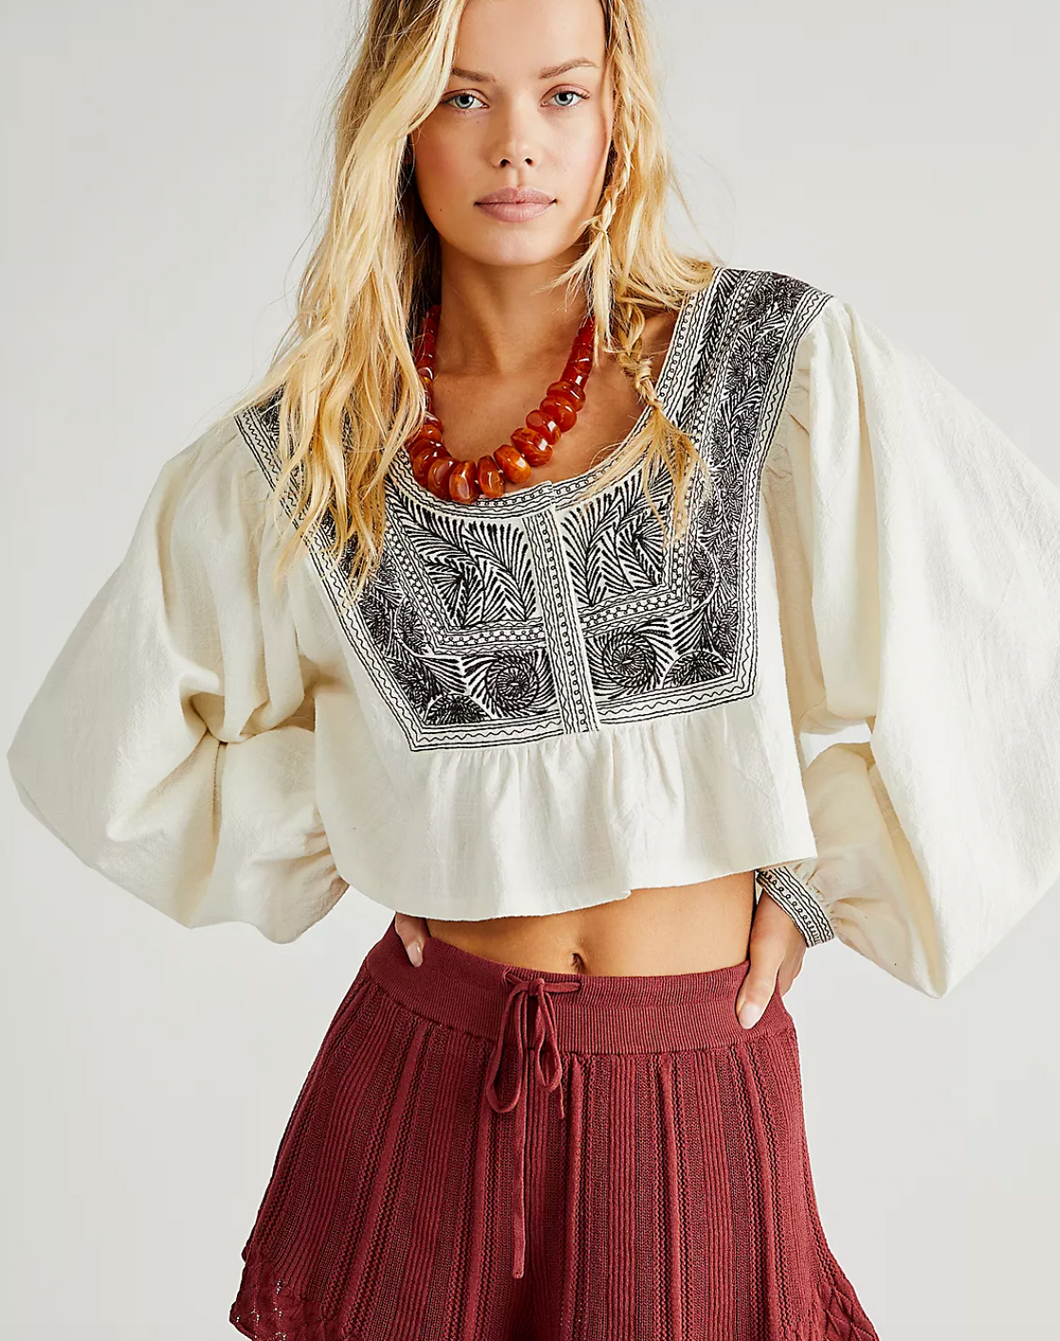 Iggie Embroidered Top